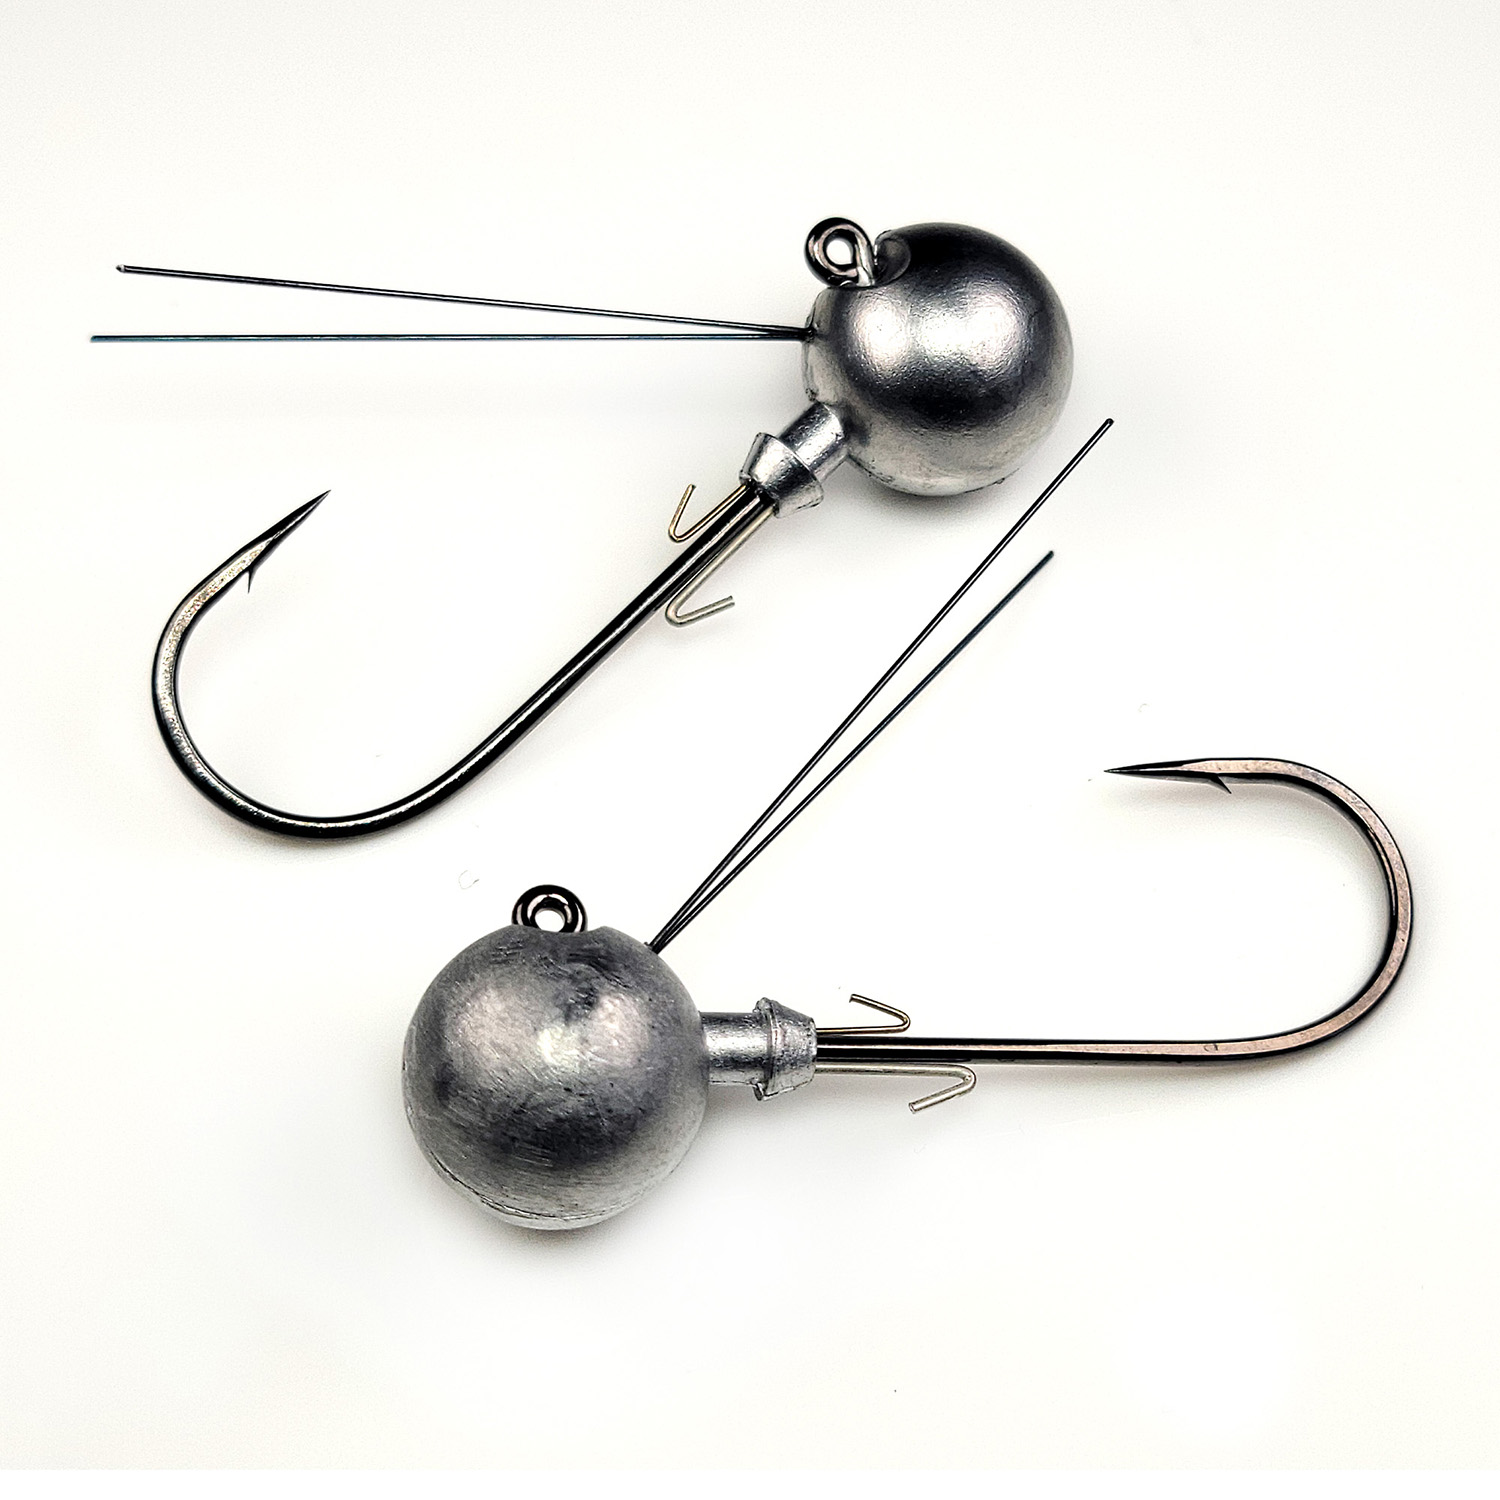 Gamakatsu® Adds a Weedless Option With the Round 26 Weedless Jig